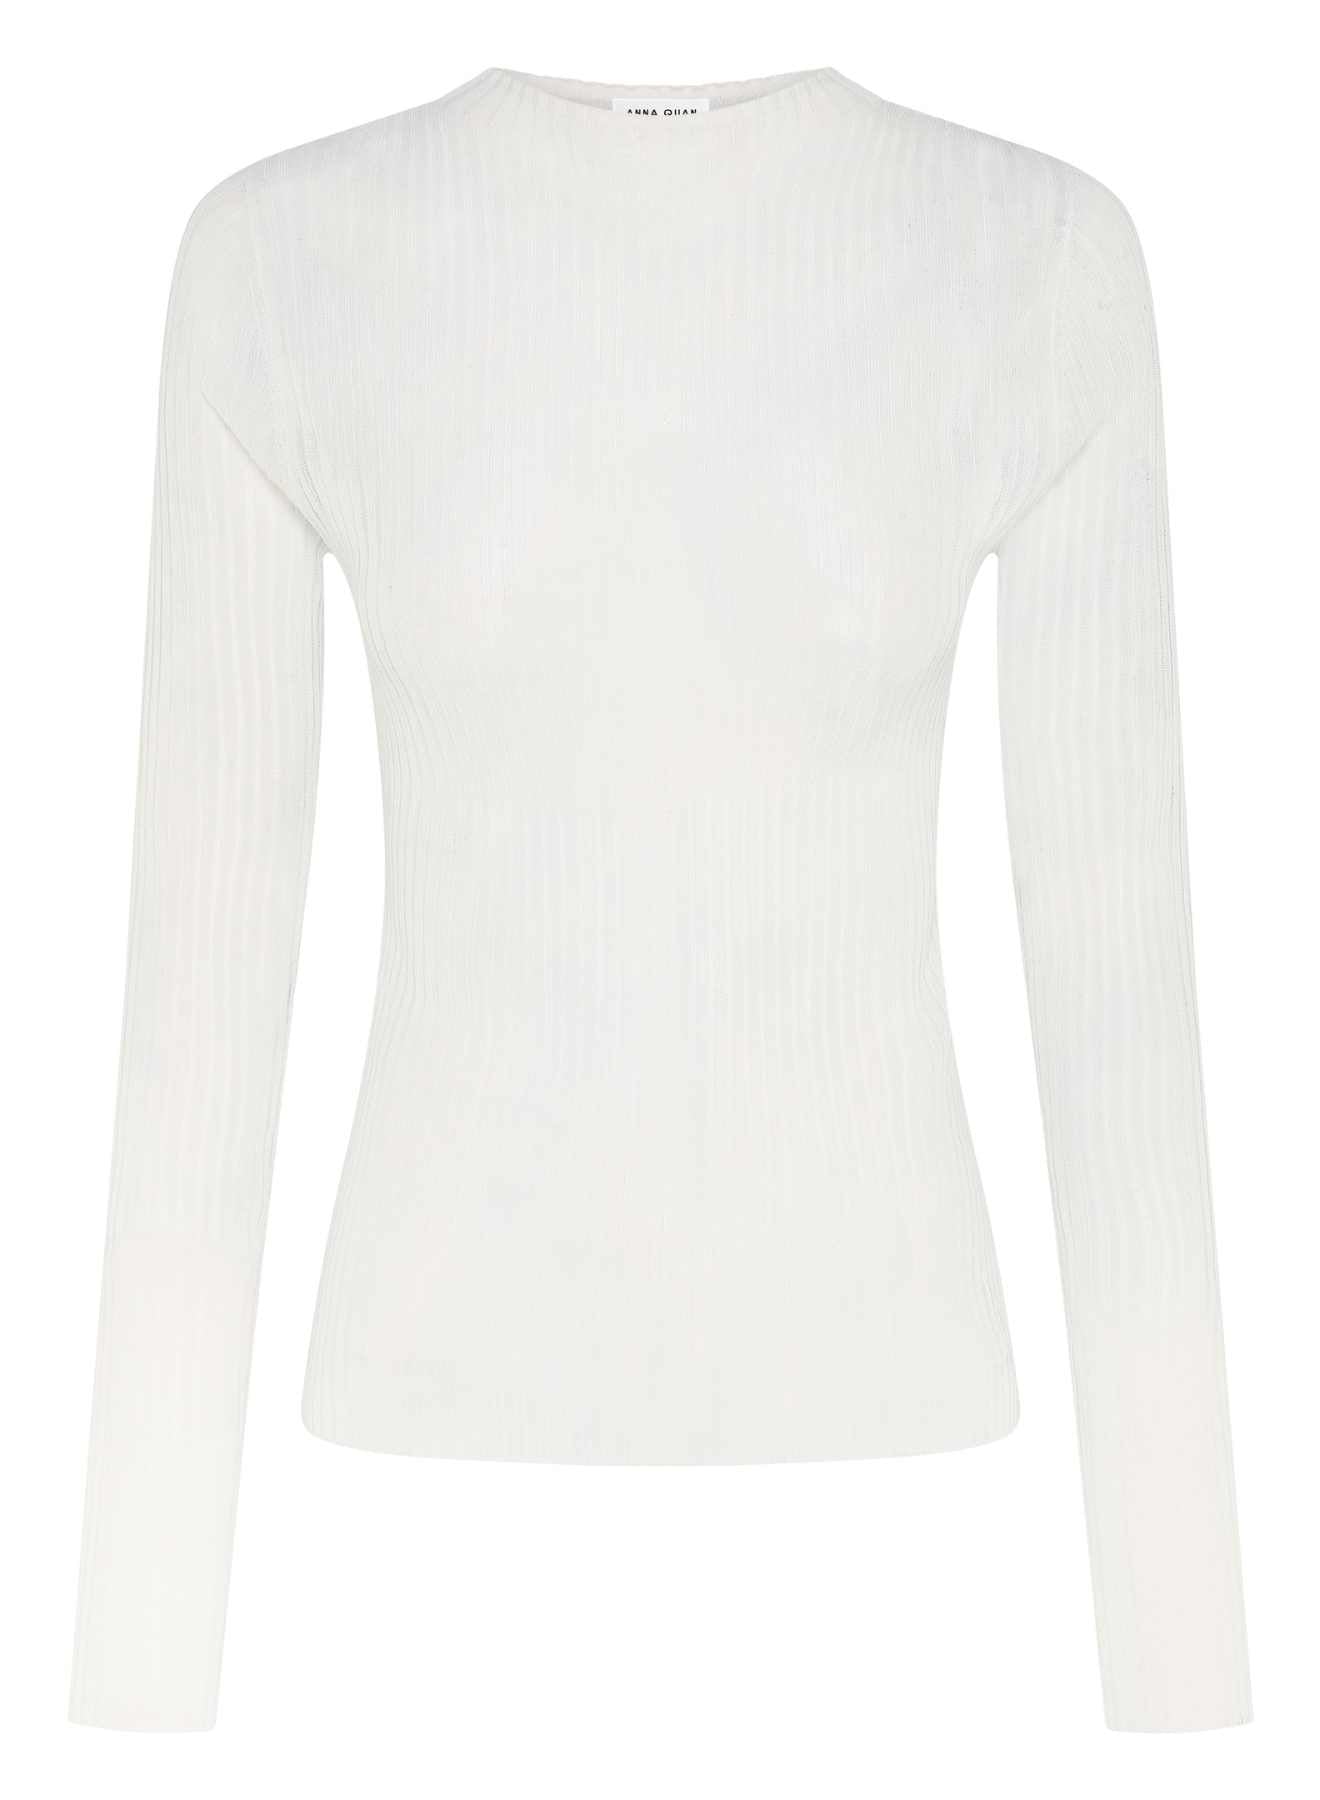 ANNA QUAN Tatum Top in sheer knit material. Long sleeves, boat neckline. Ideal for a modern and versatile wardrobe.